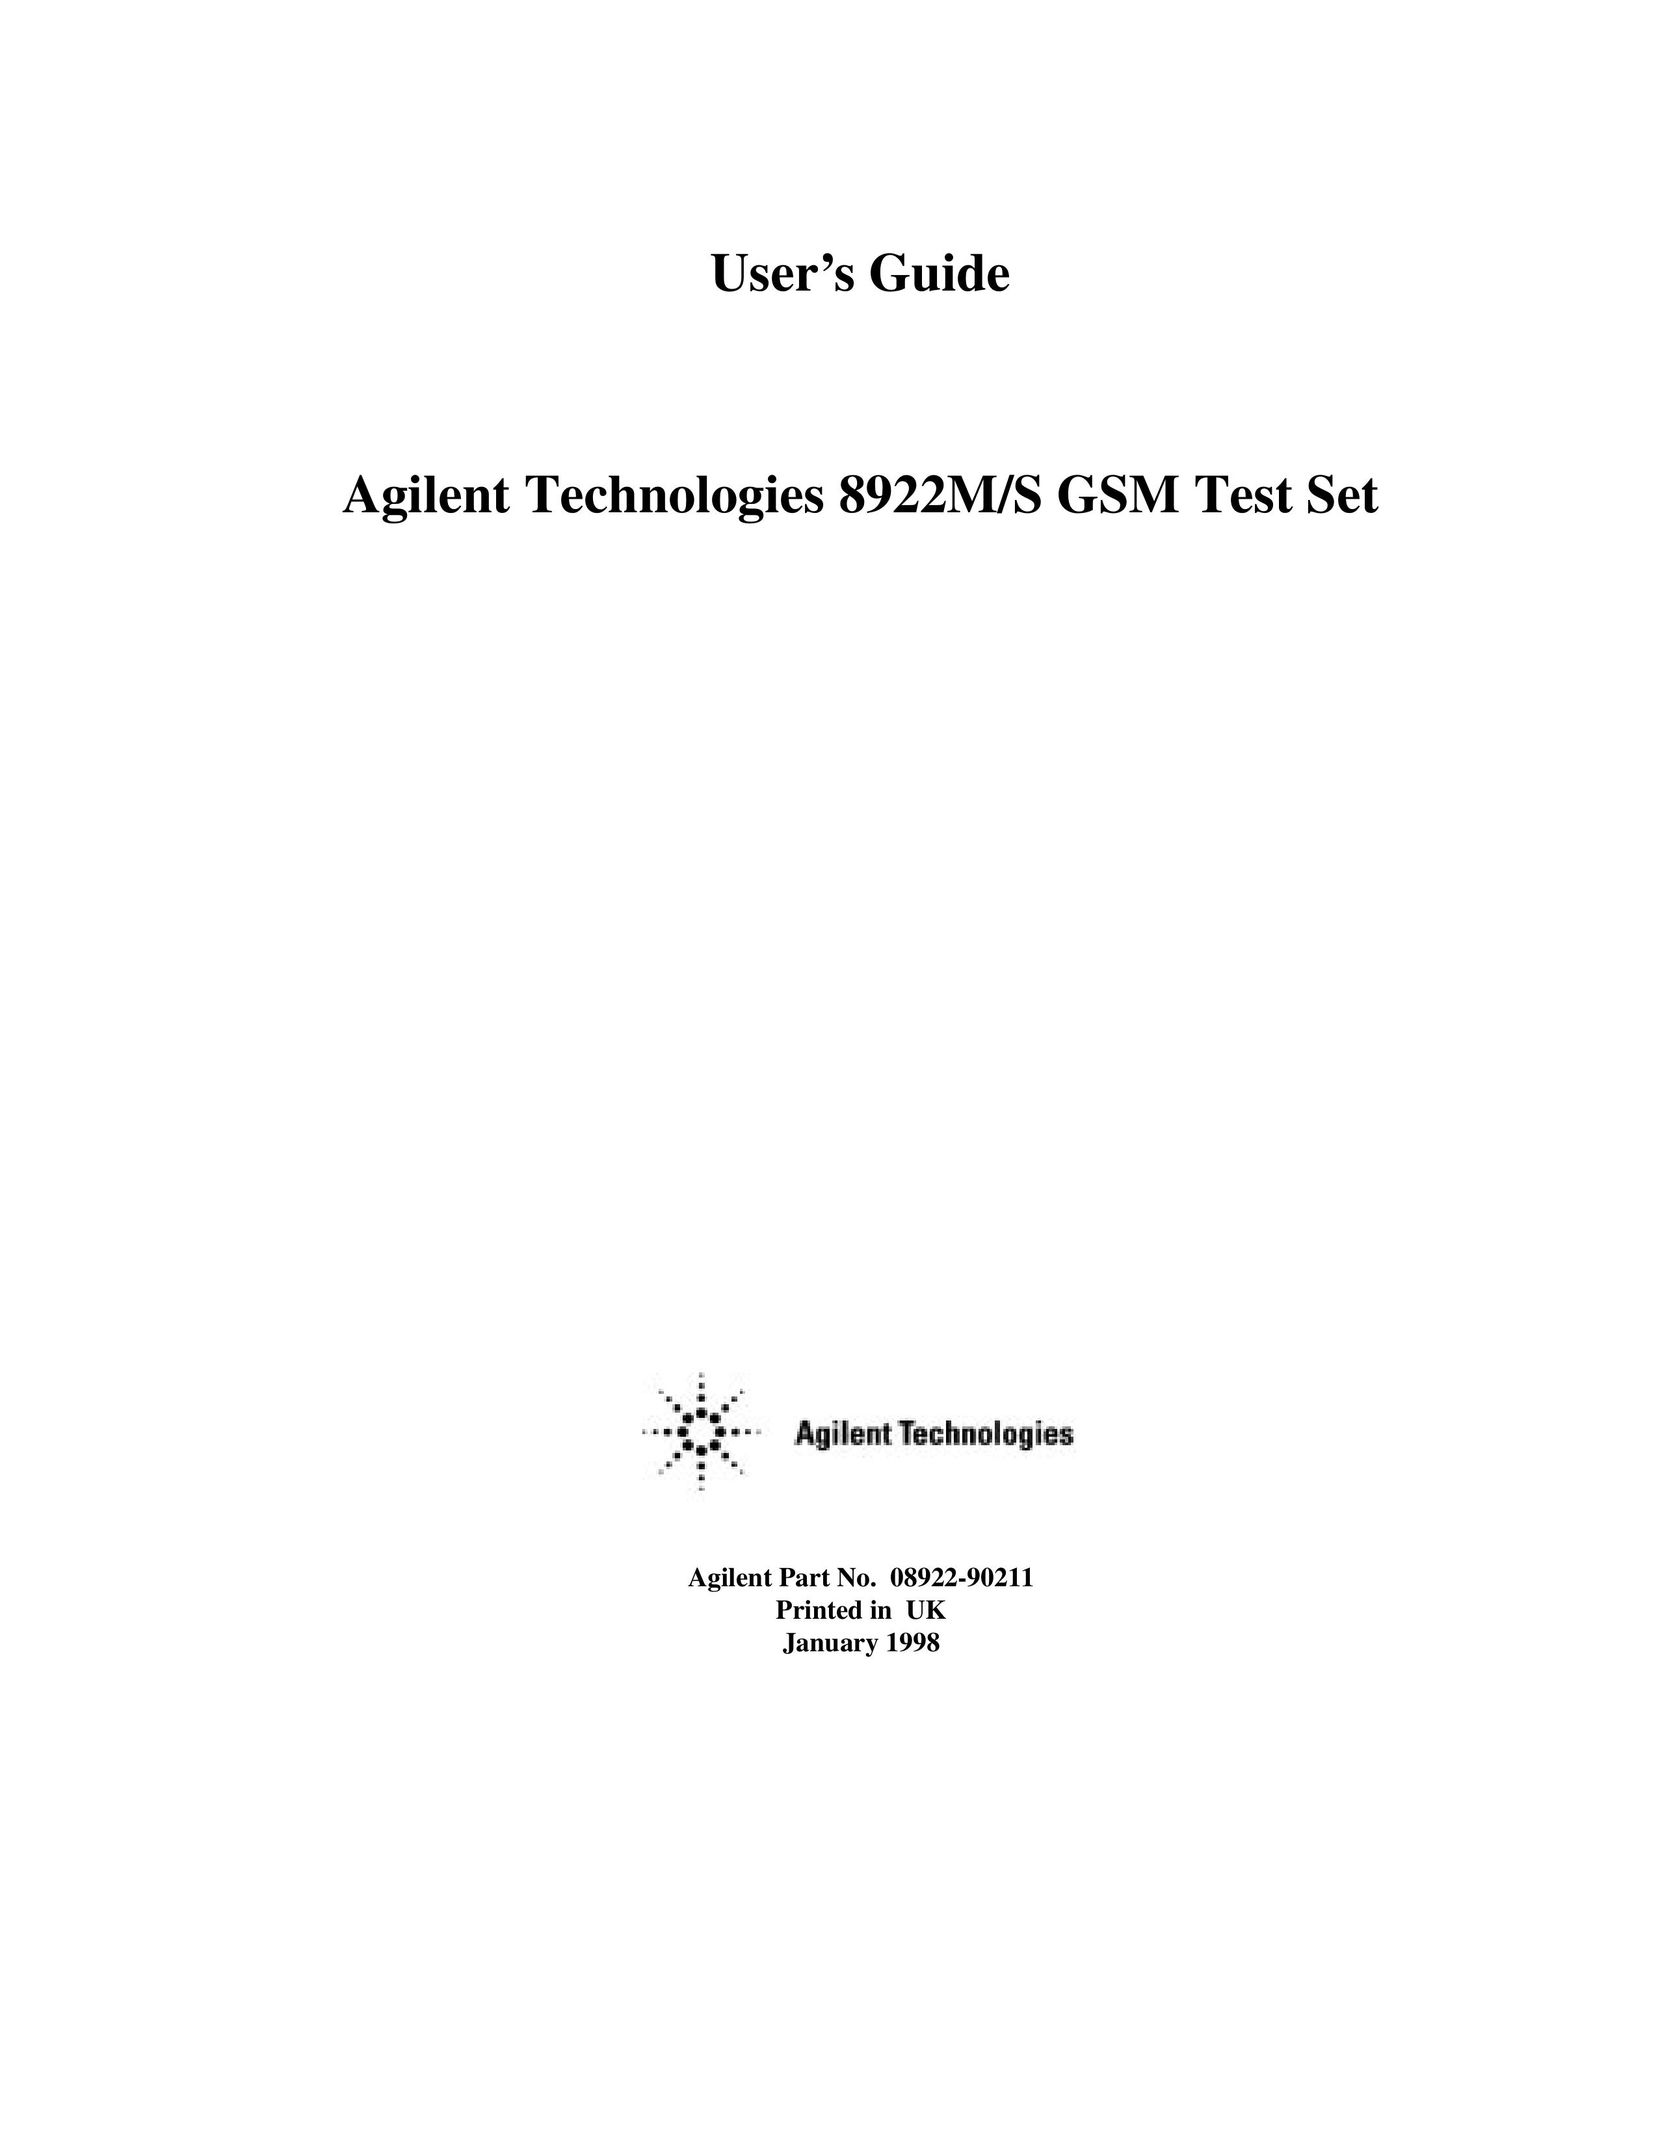 Agilent Technologies 8922M Cell Phone User Manual